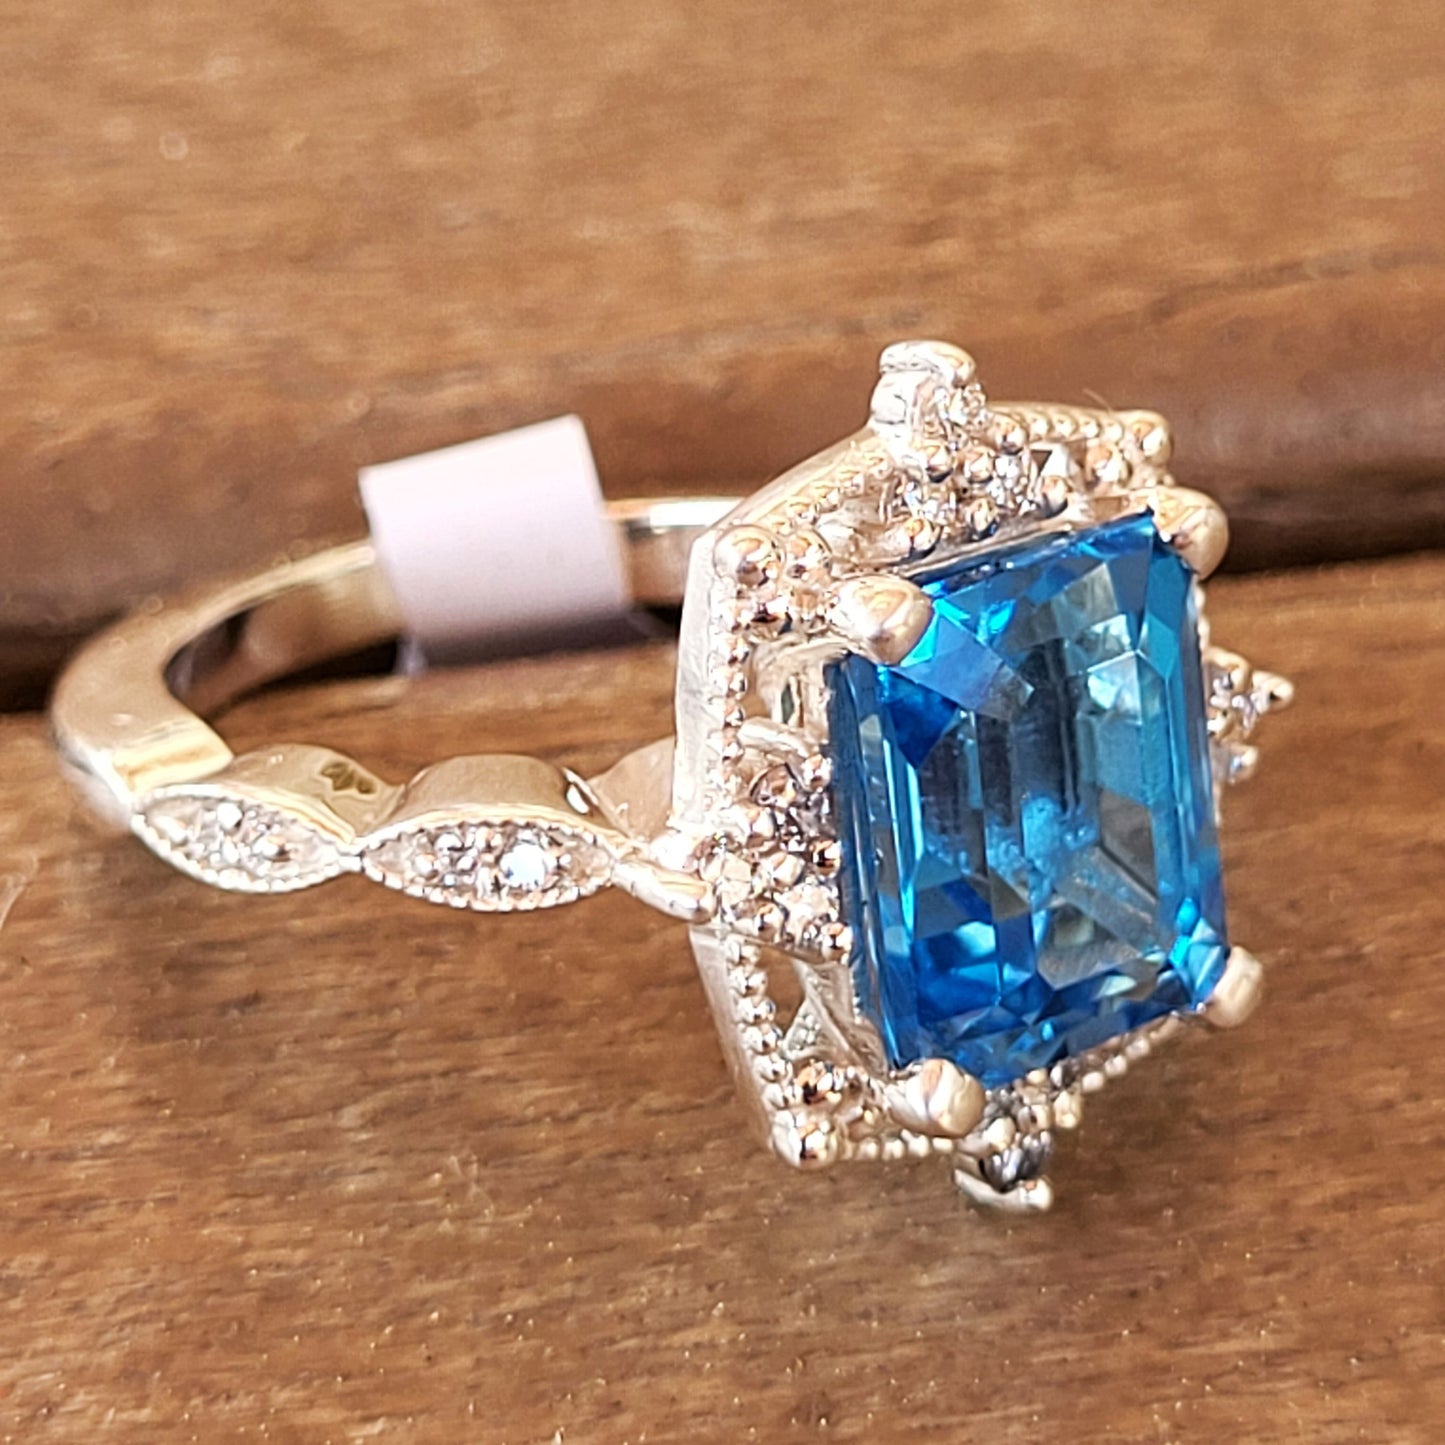 Ready to Ship emerald cut Swiss blue topaz ring in 925 sterling silver